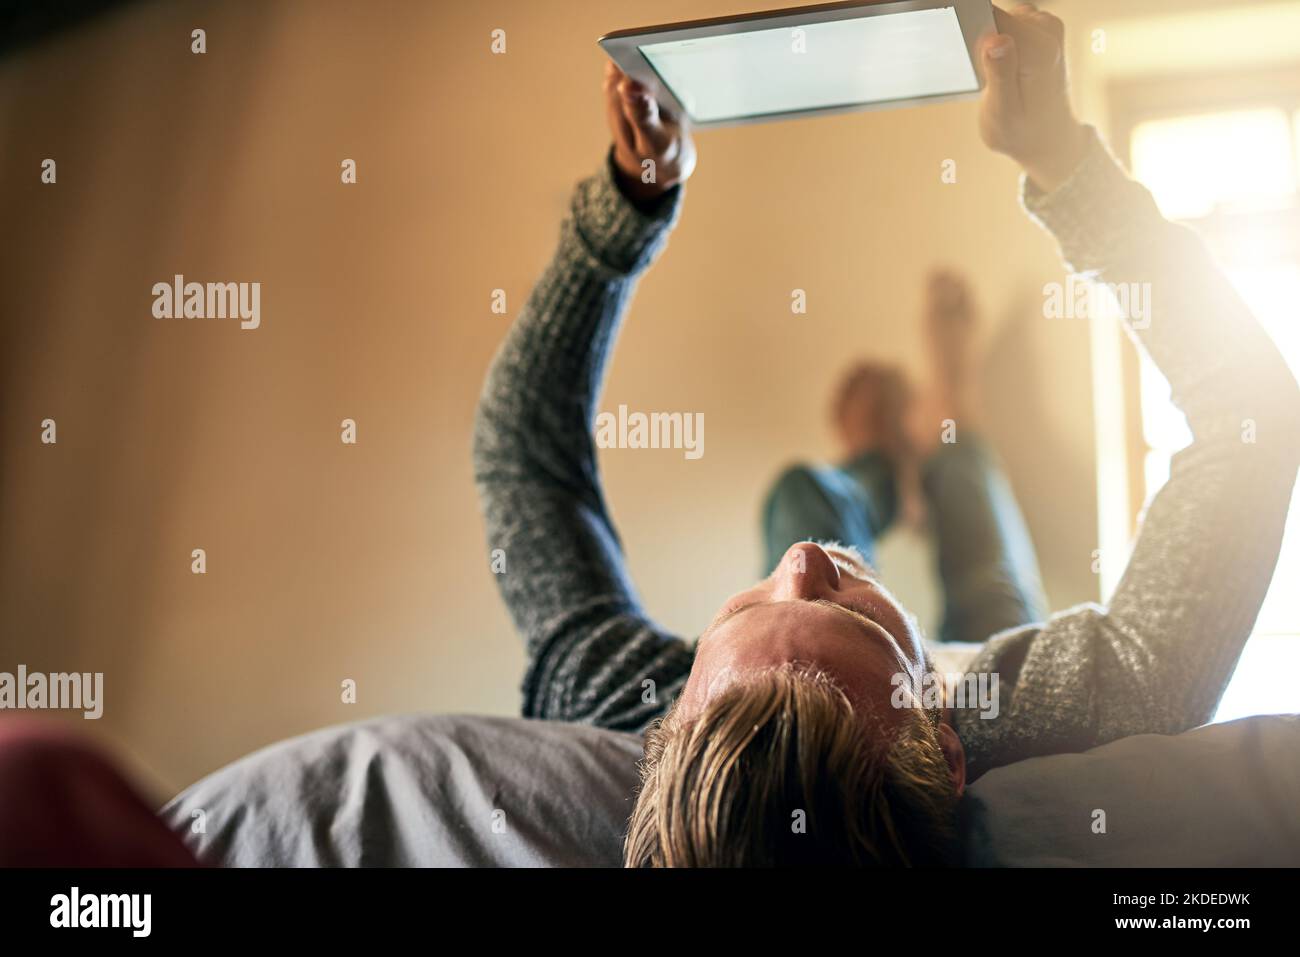 What the weekend is all about. a young man watching something on his digital tablet at home. Stock Photo